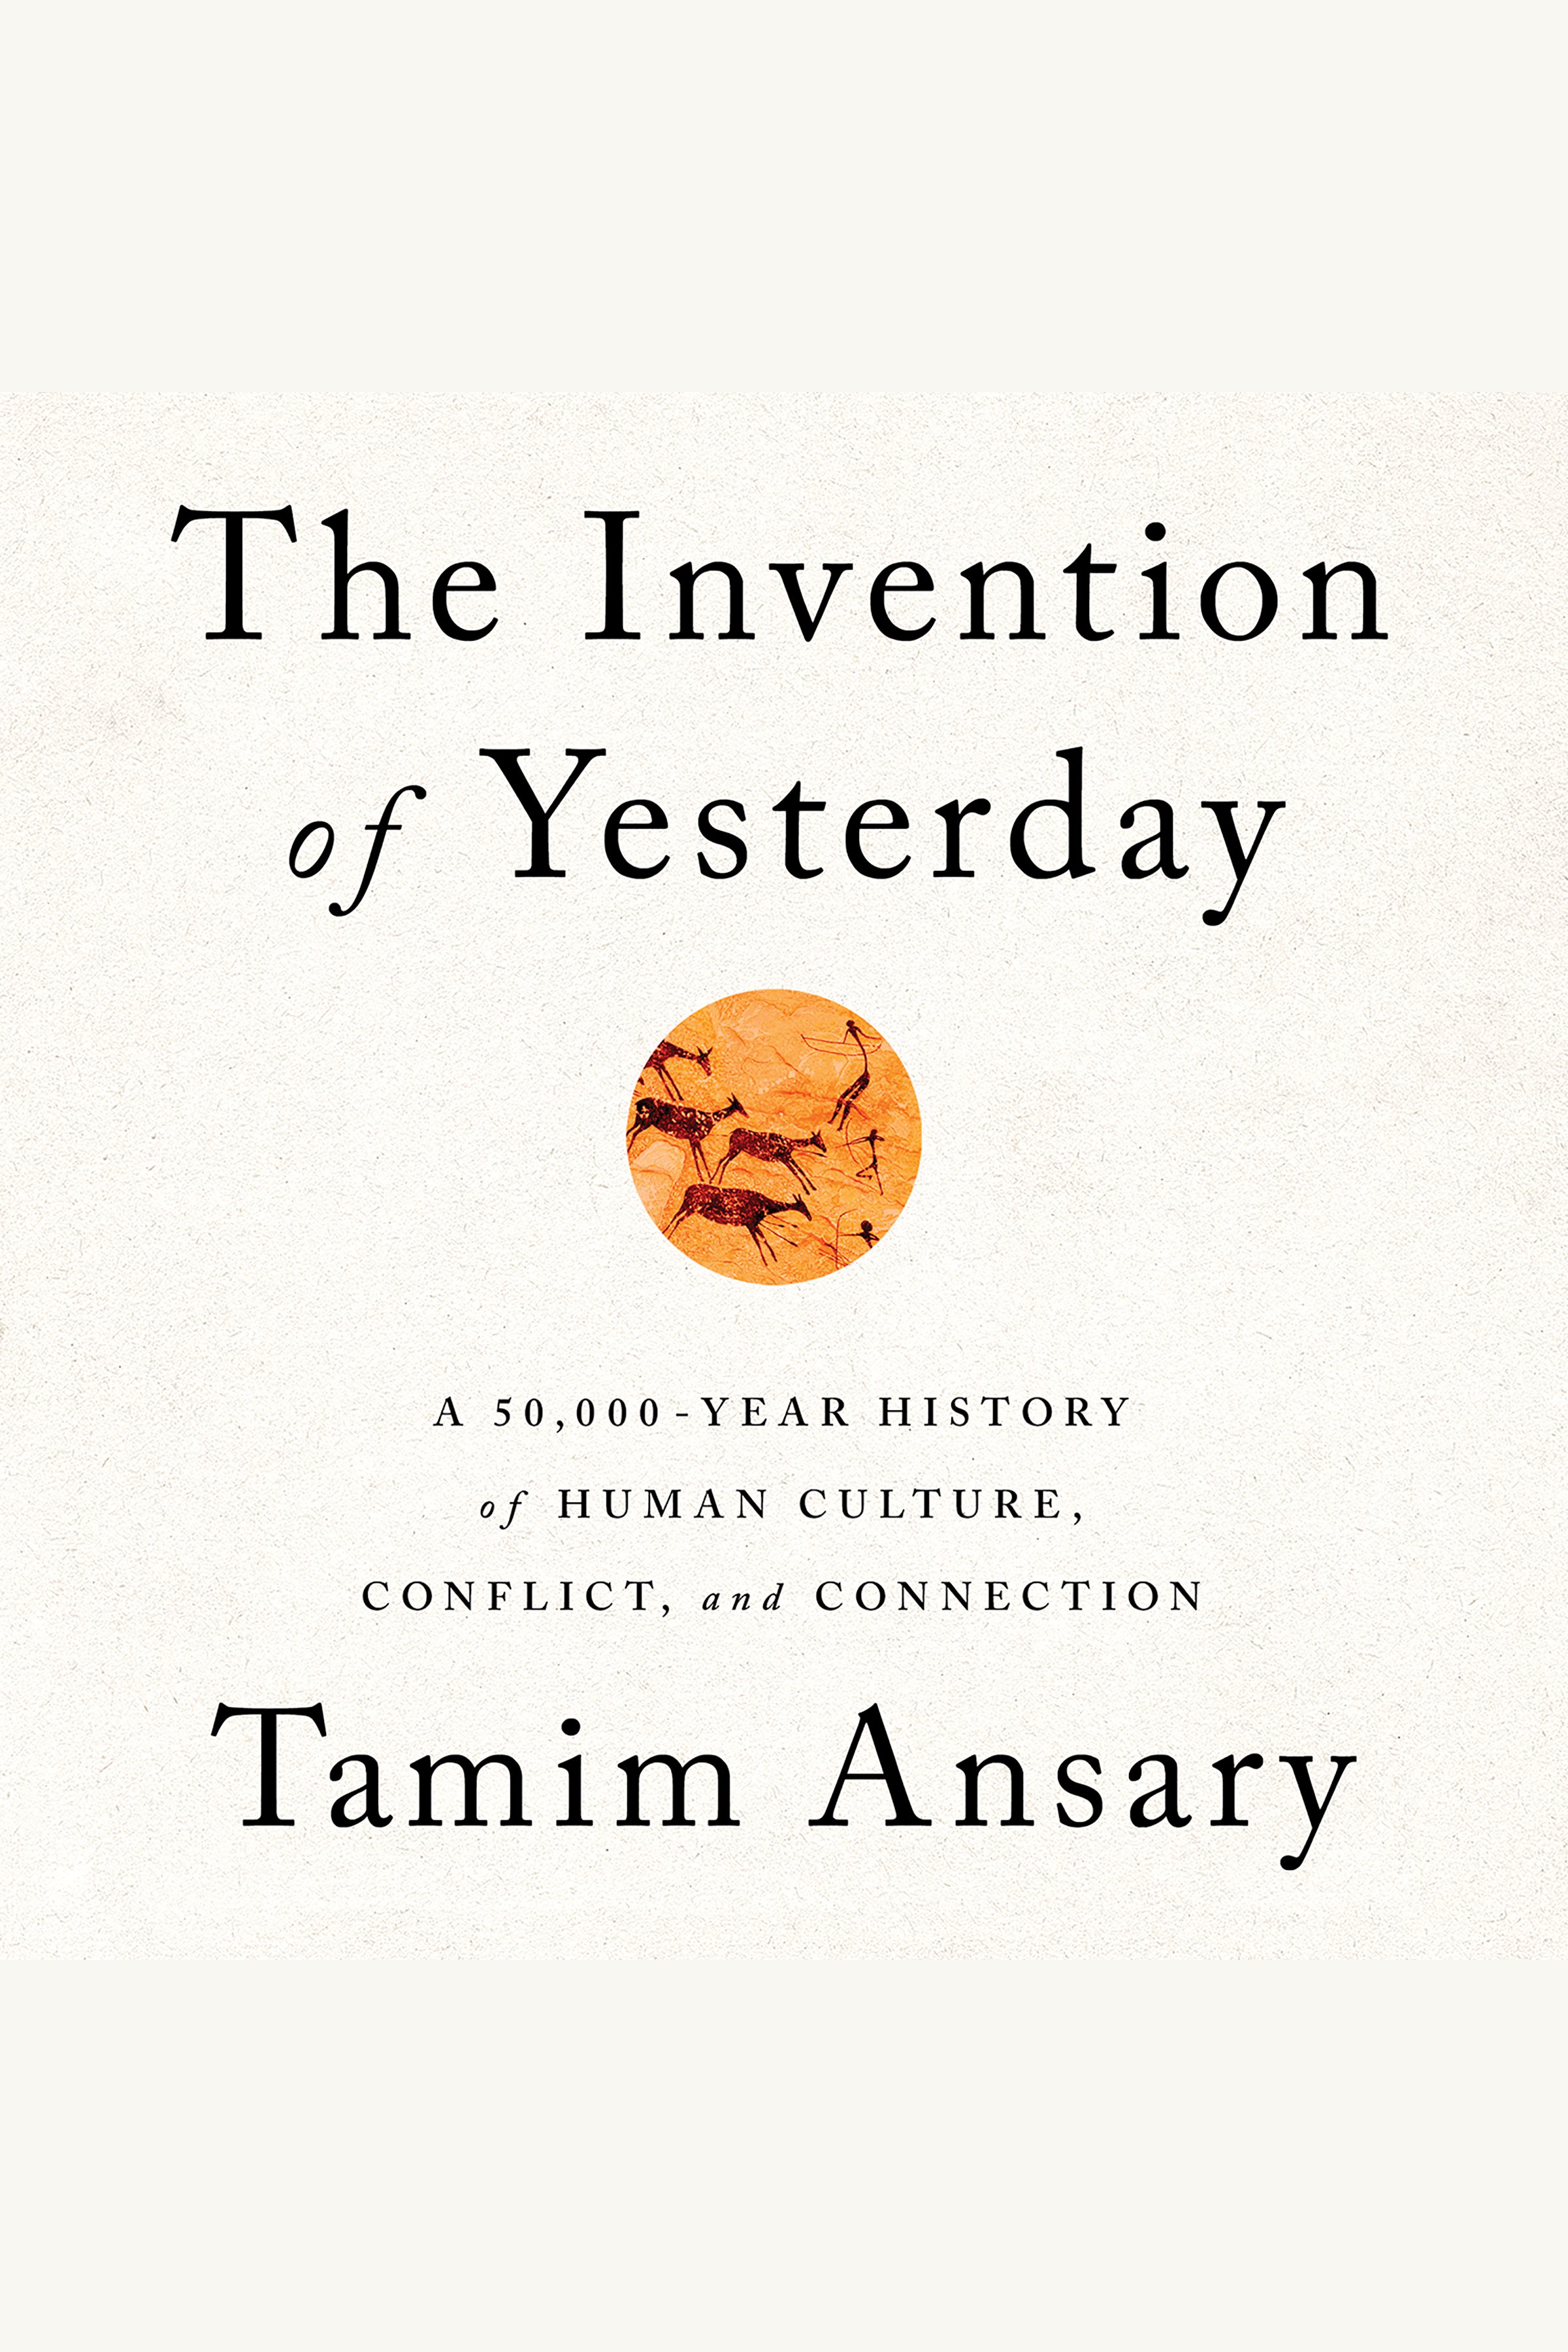 The Invention of Yesterday A 50,000-Year History of Human Culture, Conflict, and Connection cover image